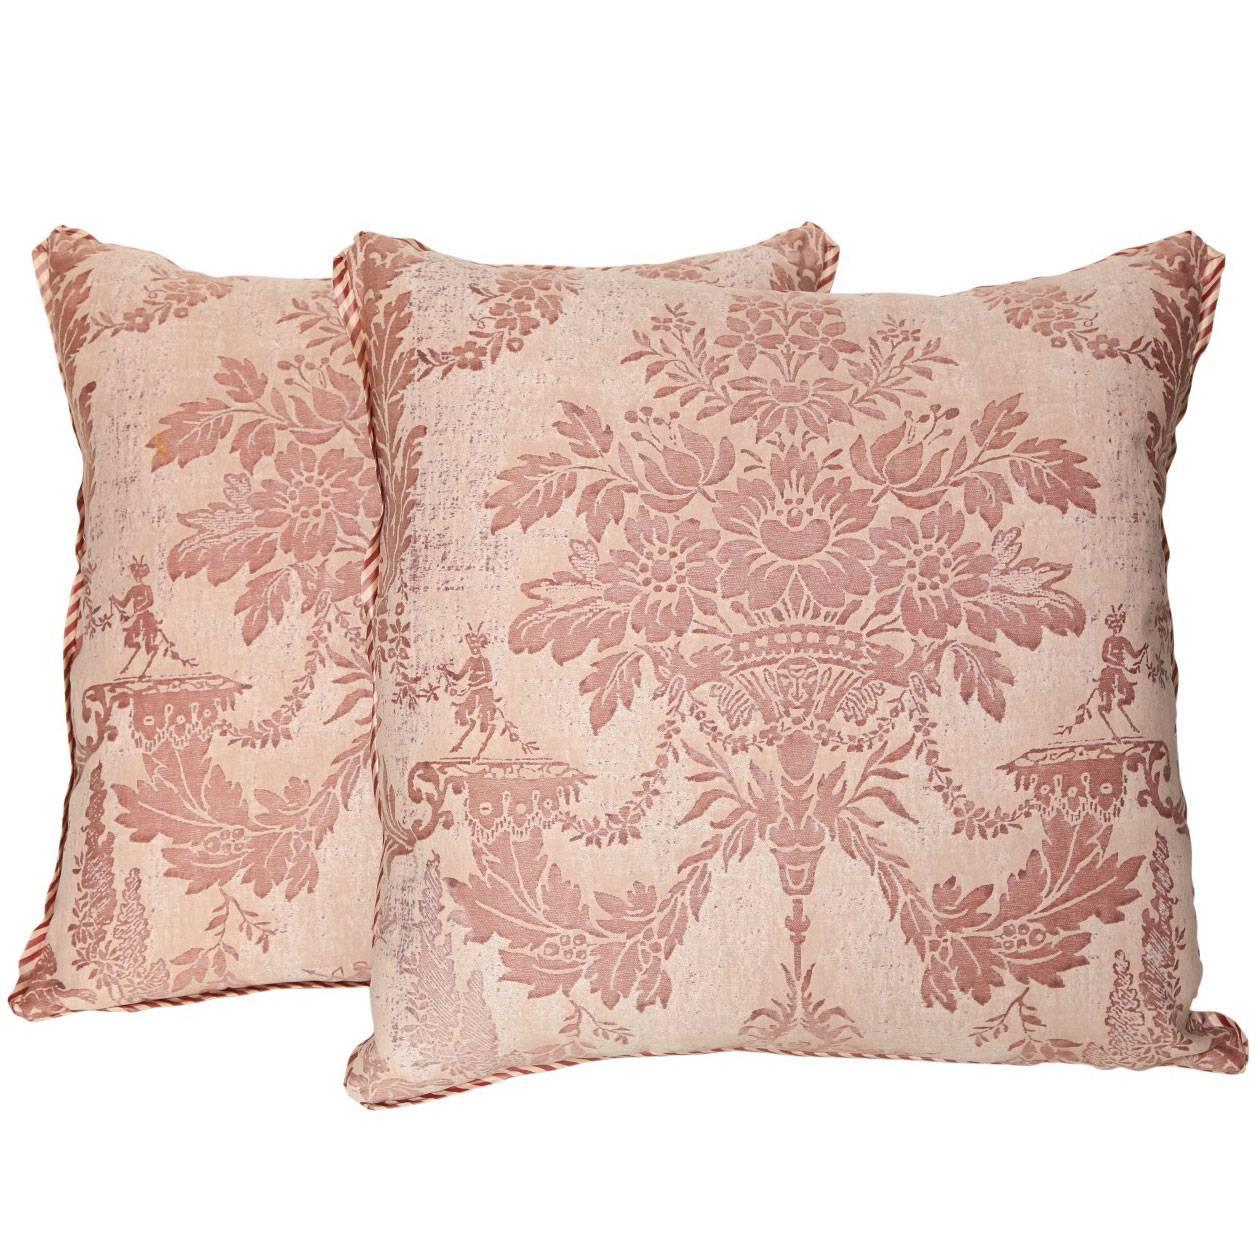 A Pair of Fortuny Fabric Cushions in the Boucher Pattern